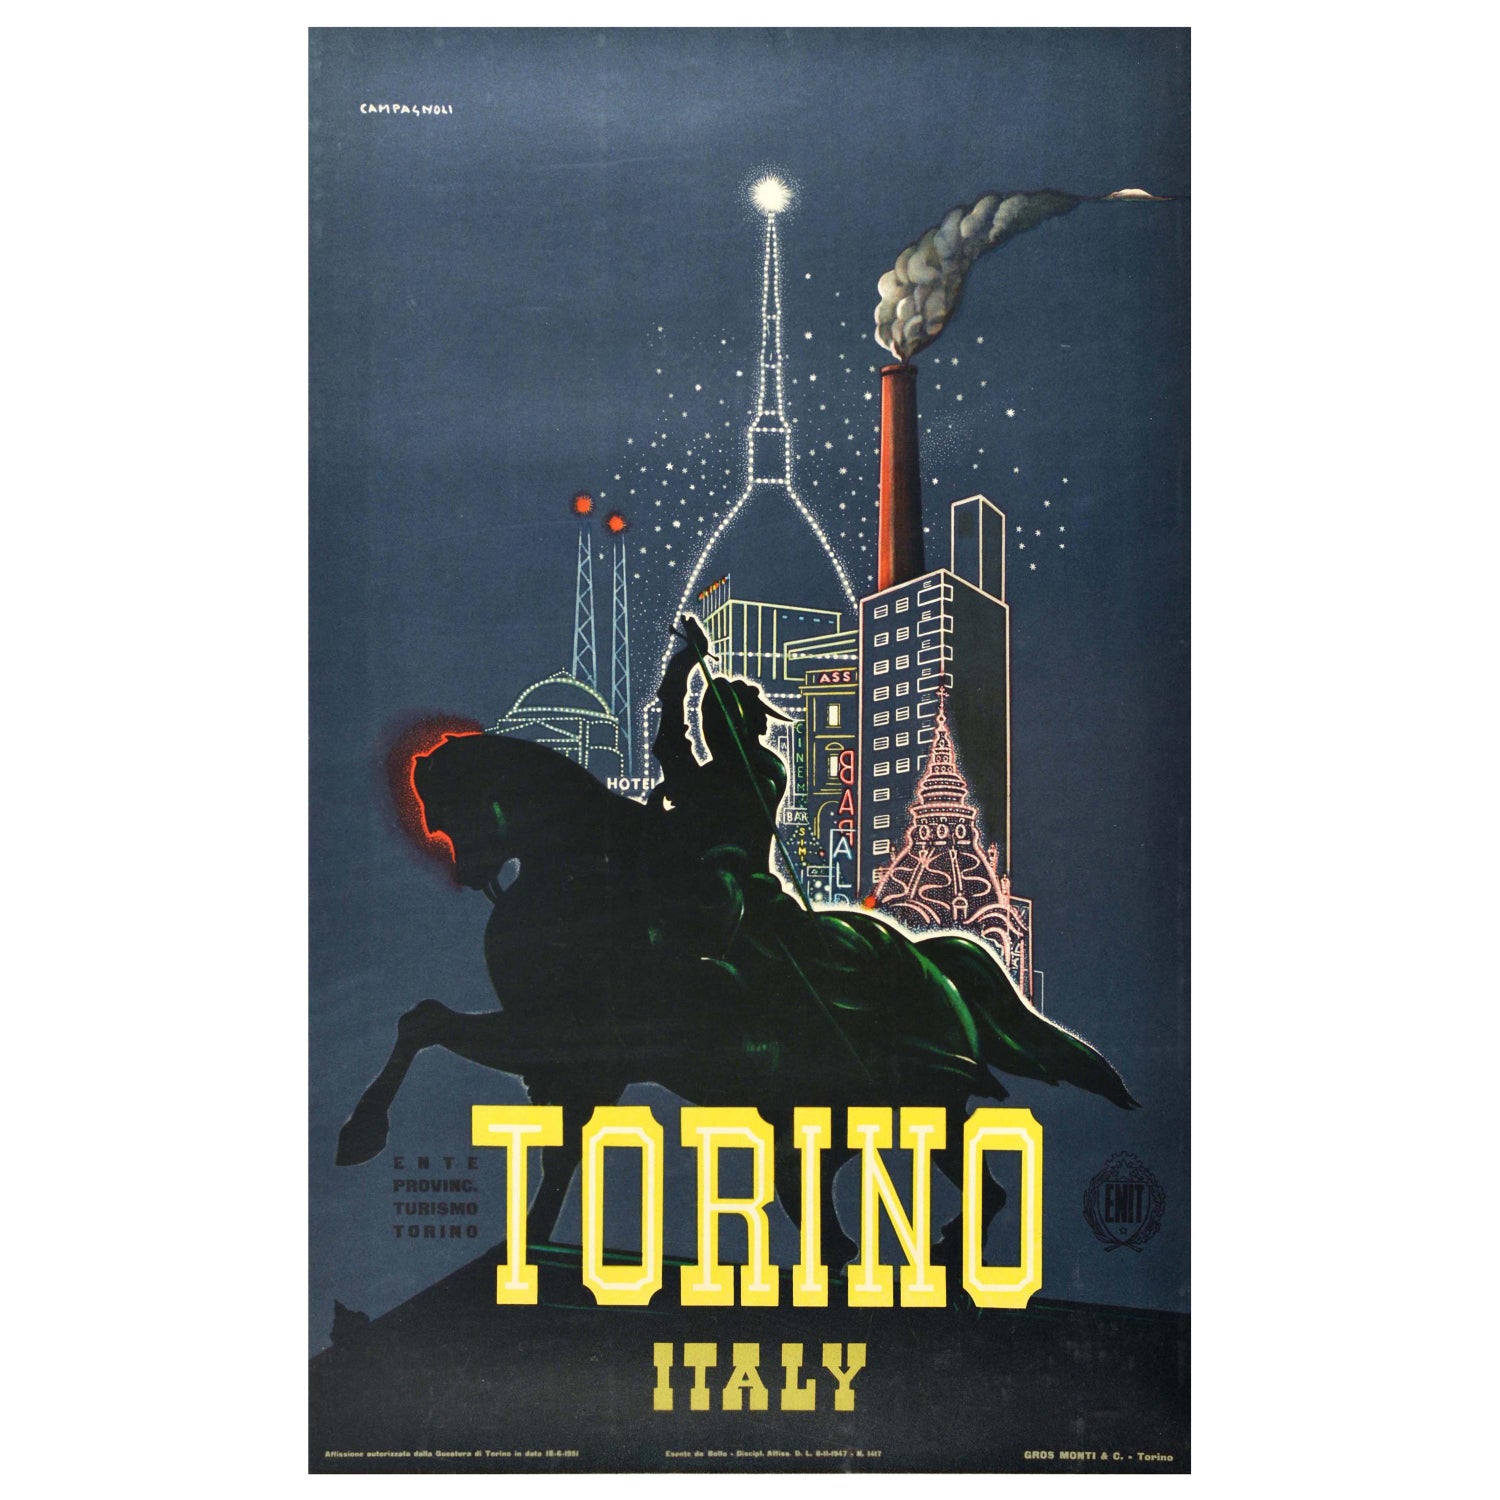 TV63 Vintage 1950's A4 Vicenza Italy Italian Travel Tourism Poster Re-Print